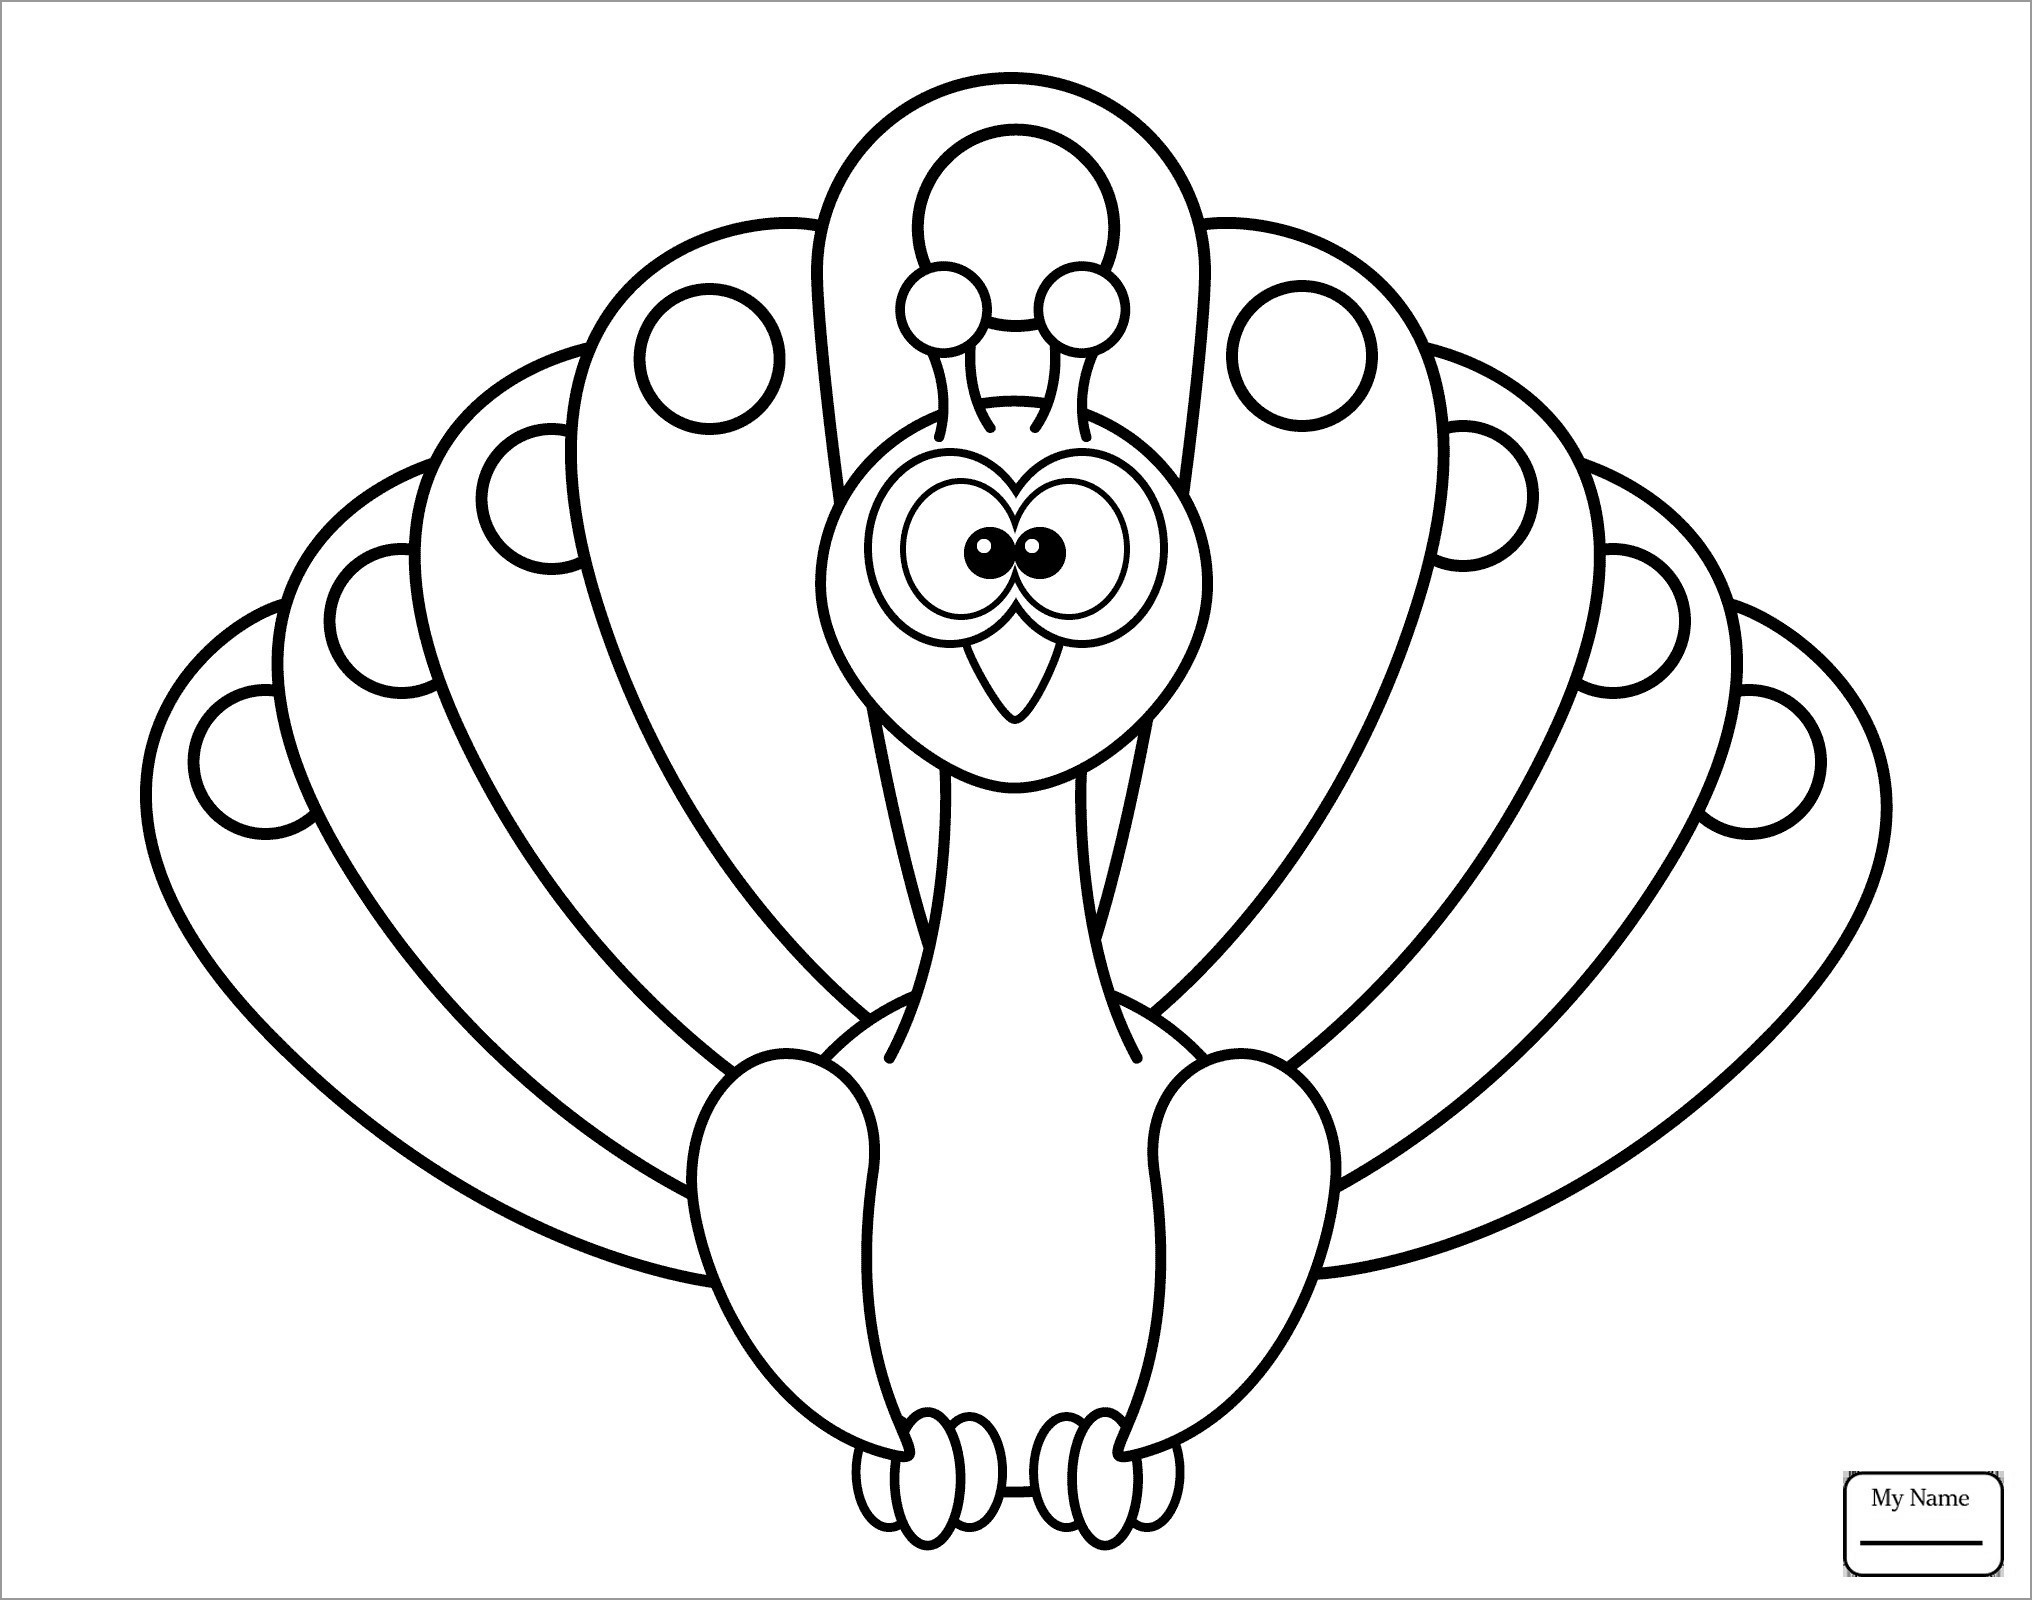 Peacock Coloring Page for Kids